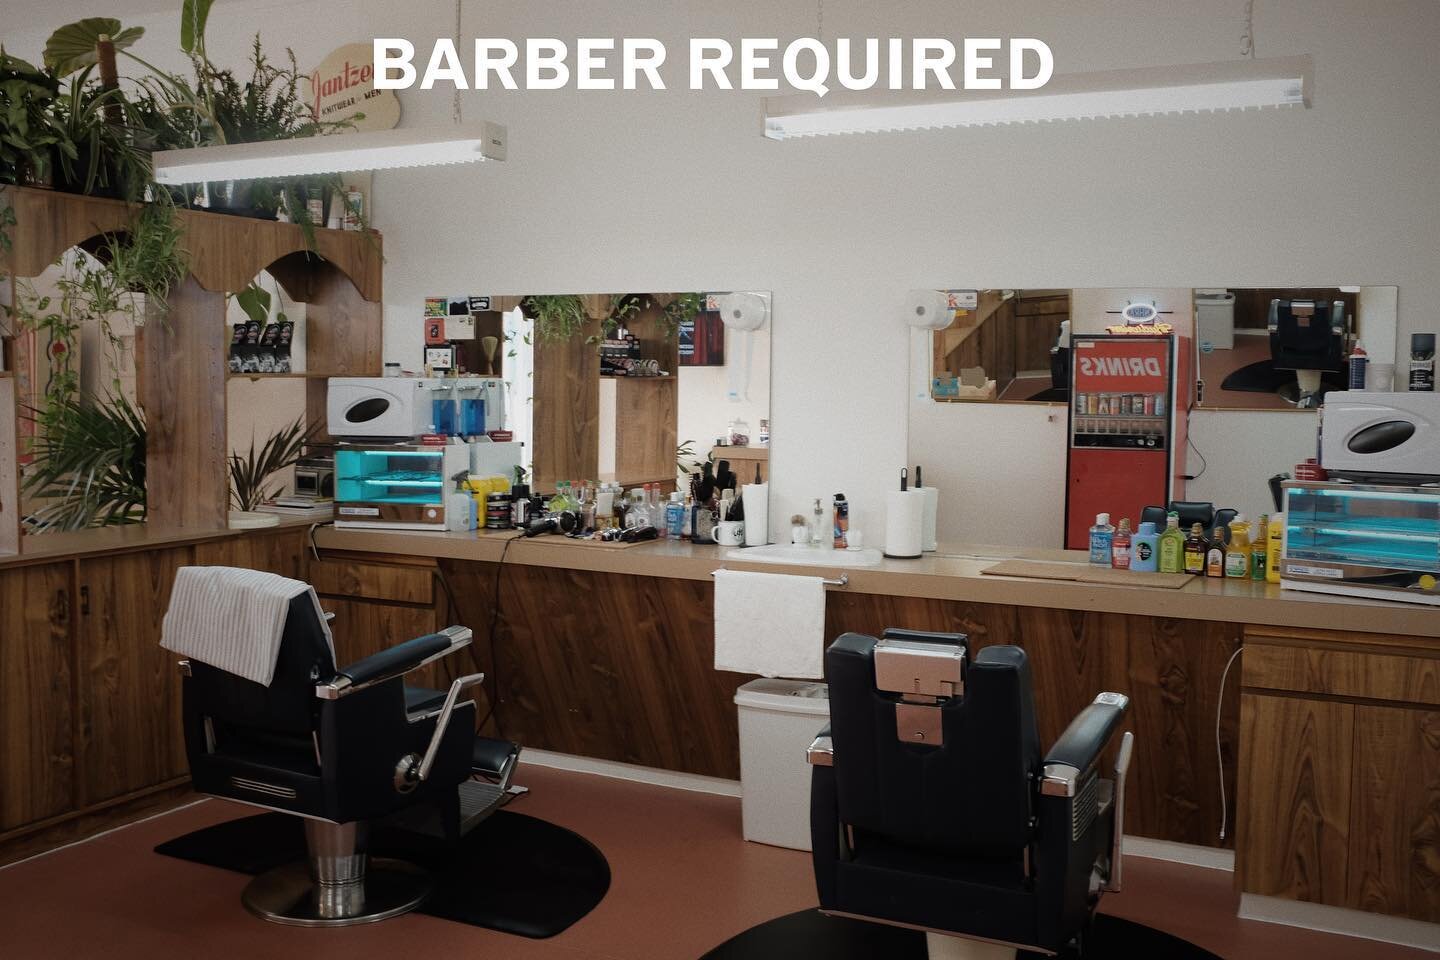 @campusbarbering is looking to fill a chair. A opportunity to have the chance of the highest standard of earning potential without the risk of owning one&rsquo;s own business. Requirements will feel like common sense to those with a little self regar